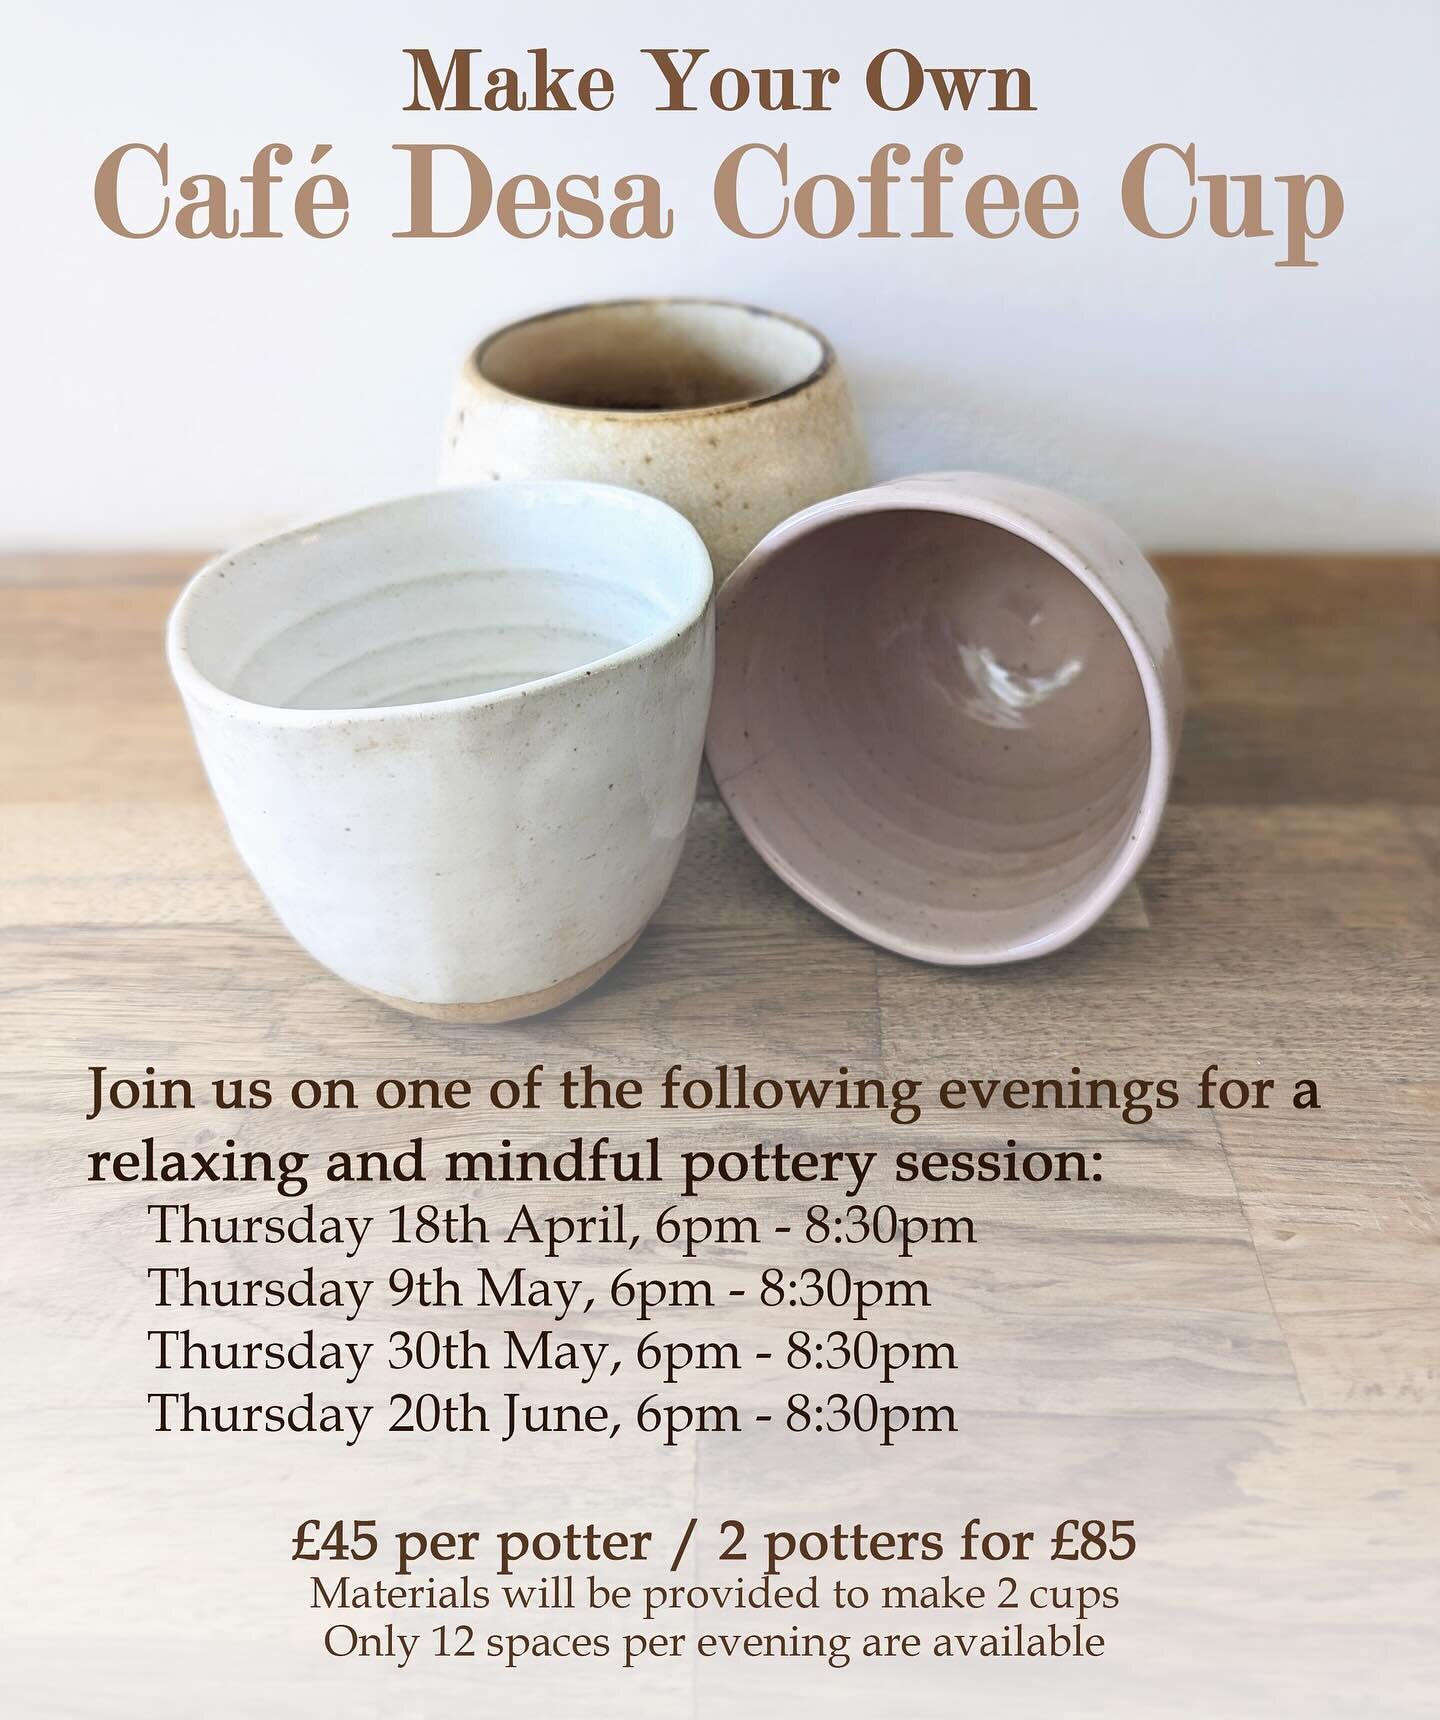 More DATES RELEASED!

These workshops are really popular so please contact @pippaprosser to secure your space!
.
.
.
.
#pottery #leamington #leamingtonspa #leamingtonspabusiness #warwick #warwickshire #leamington #leamingtonlife